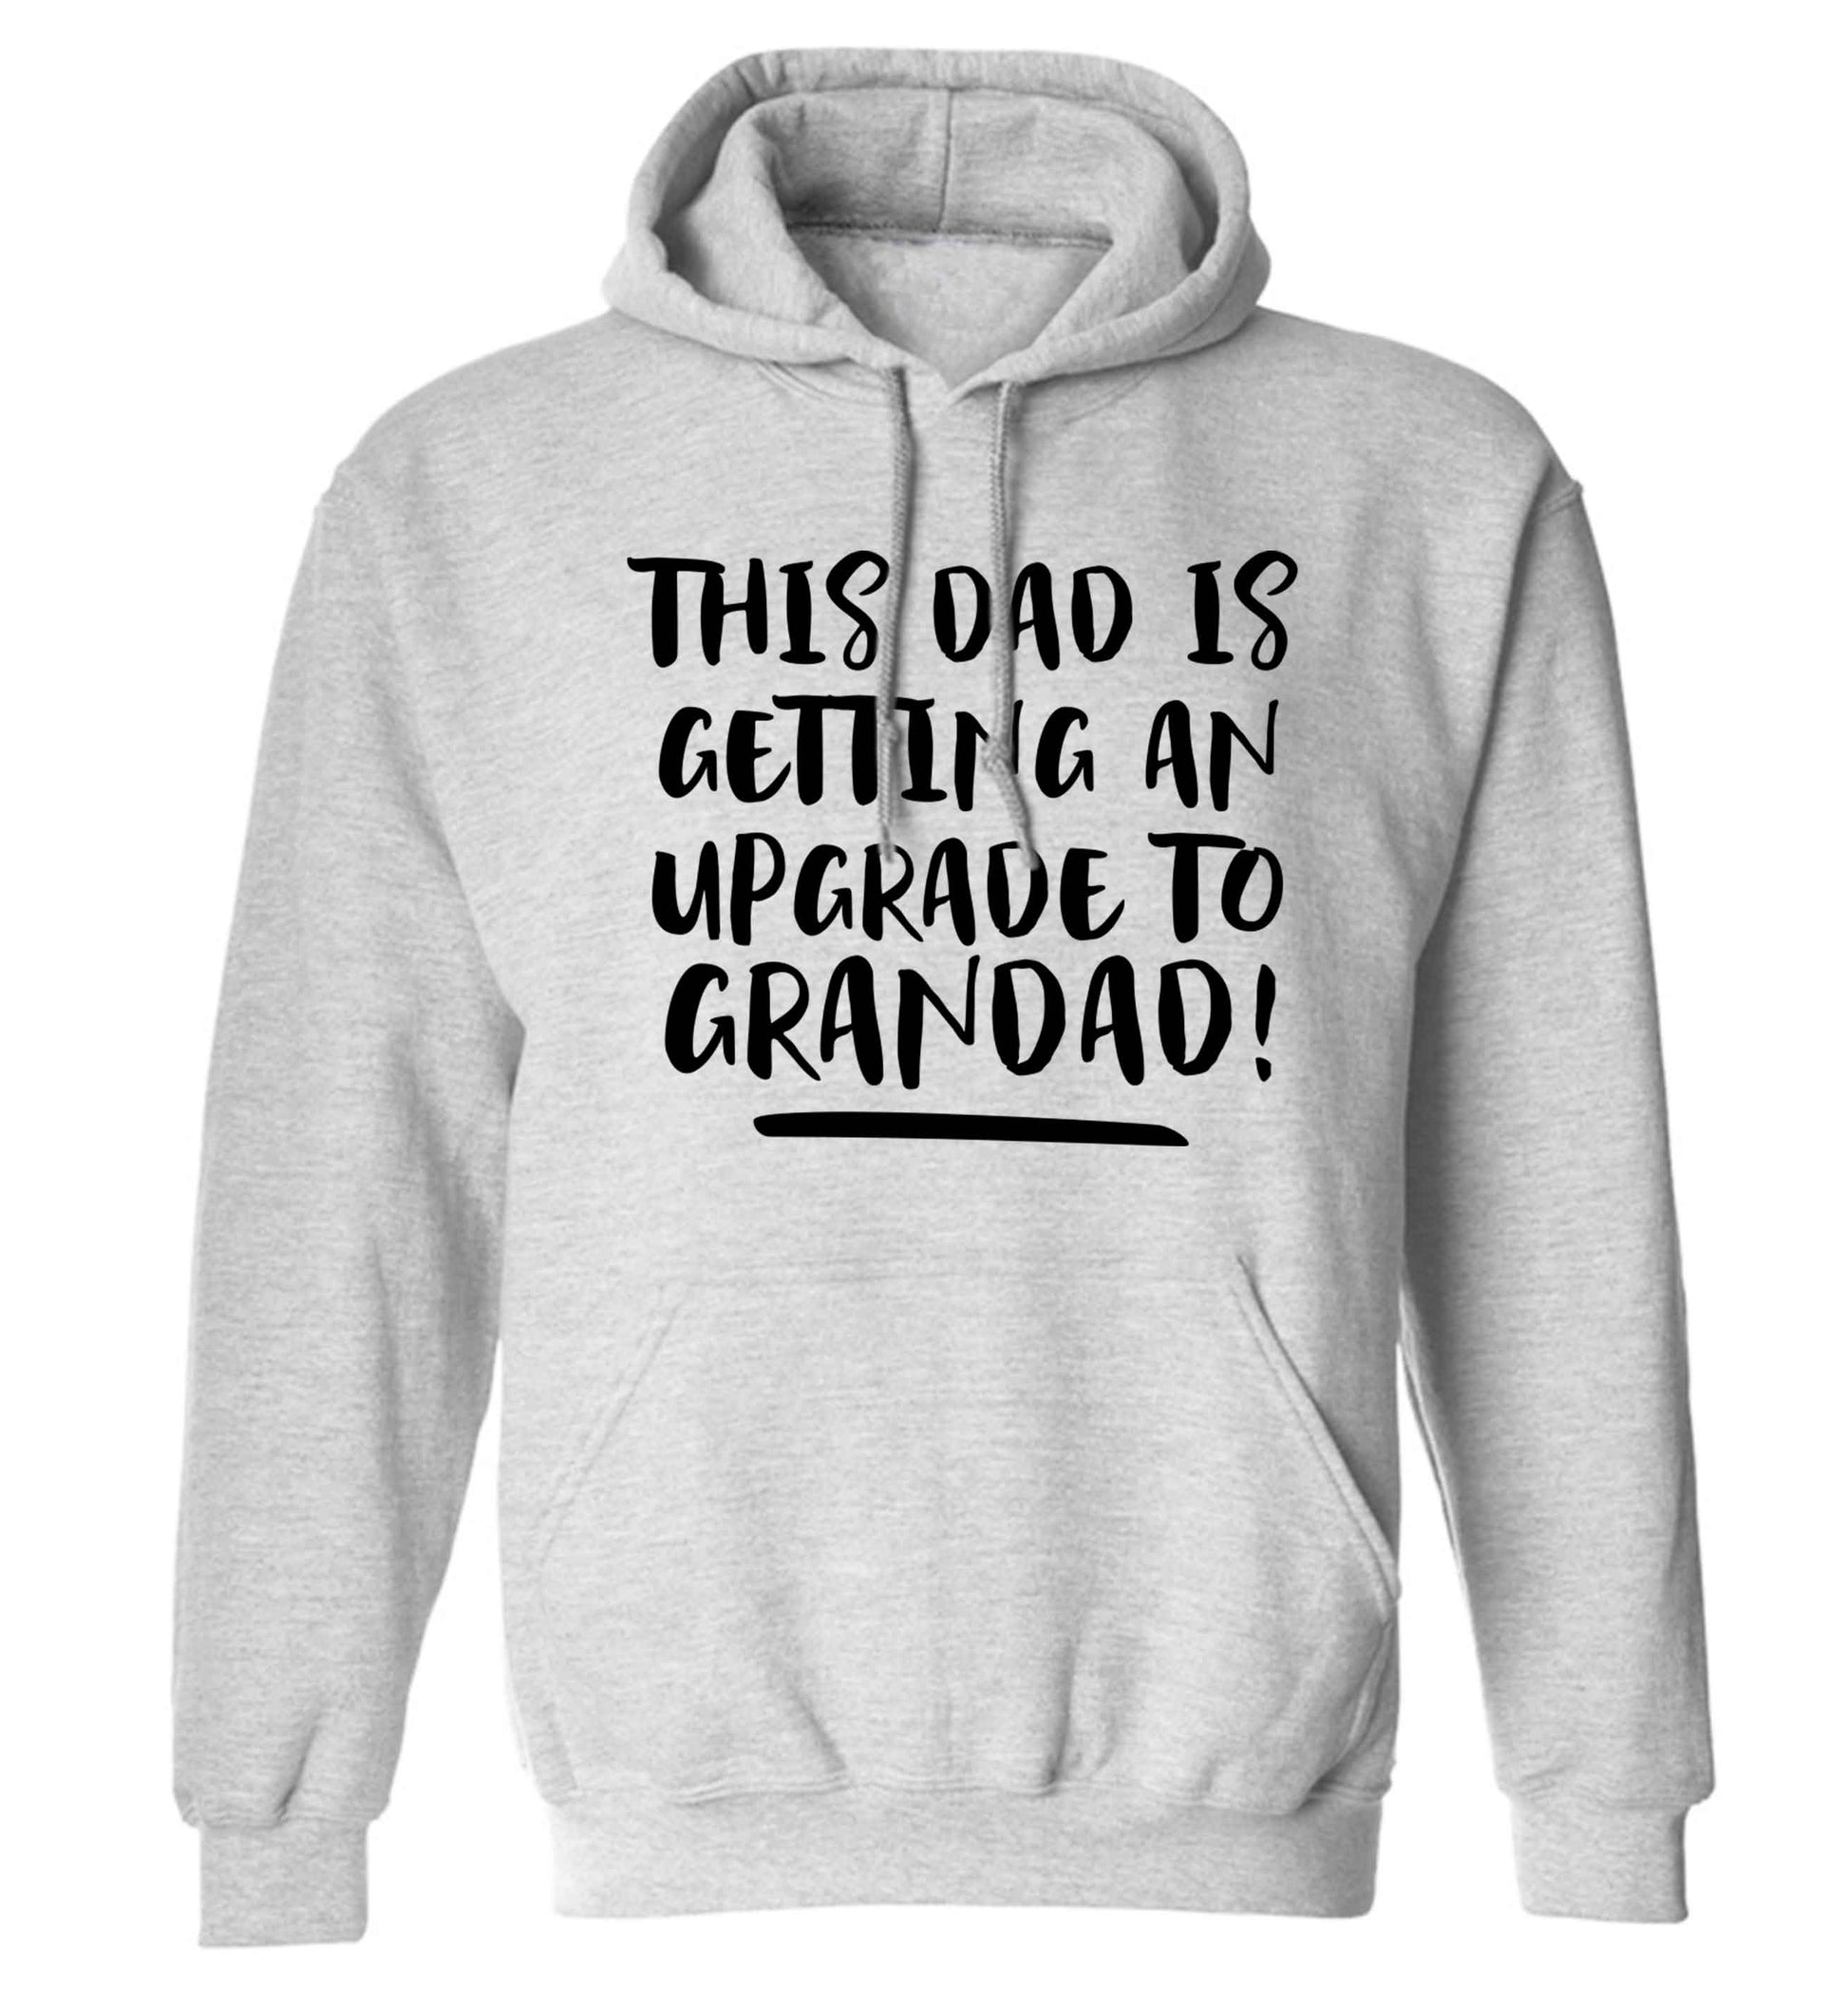 This dad is getting an upgrade to grandad! adults unisex grey hoodie 2XL